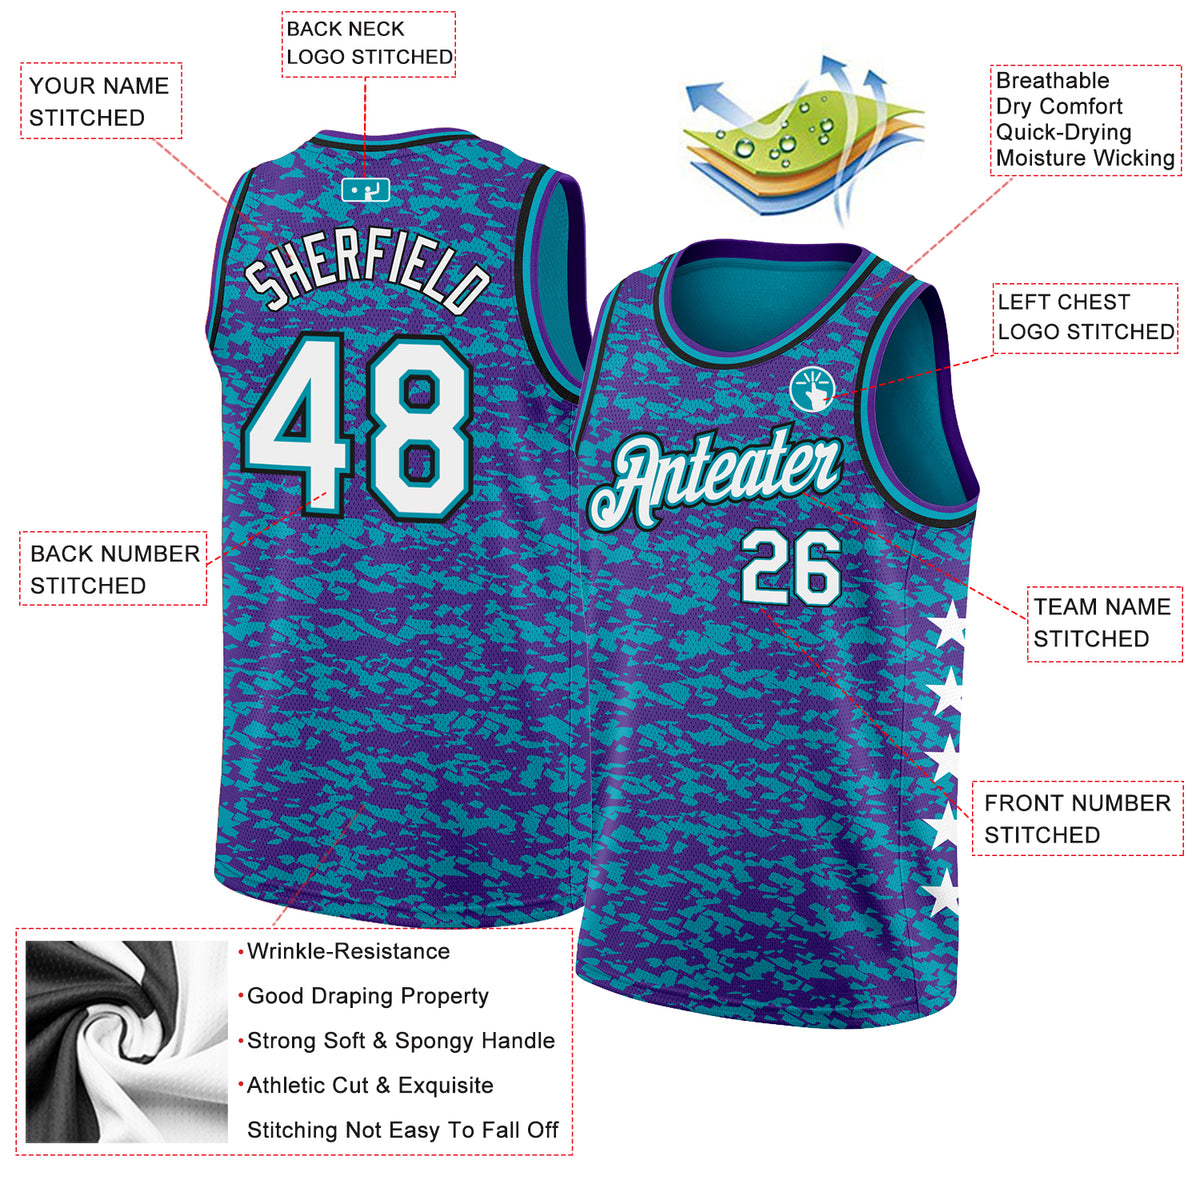 Sublimated Basketball Jersey Hornets style